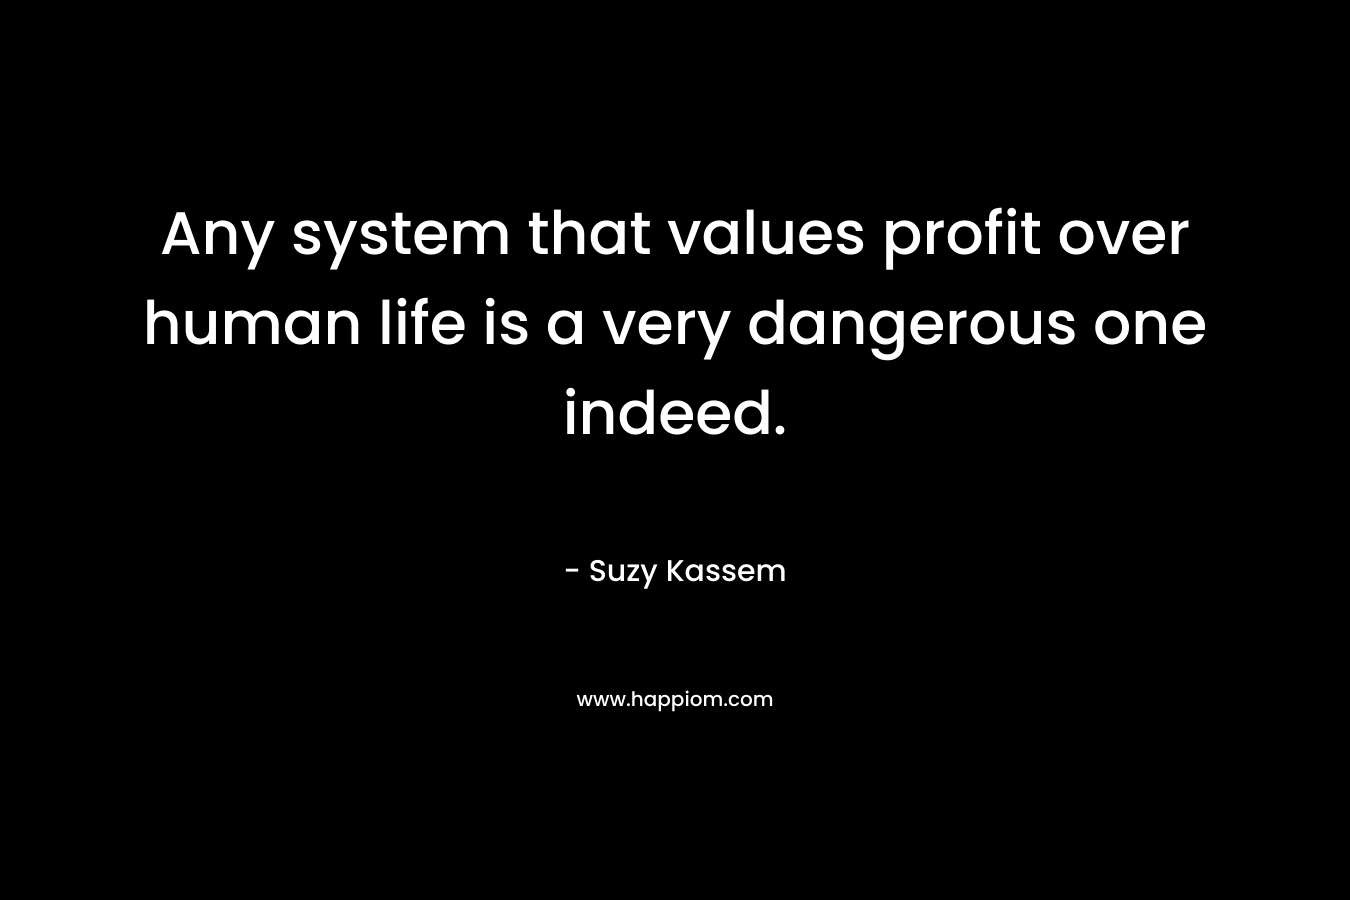 Any system that values profit over human life is a very dangerous one indeed.